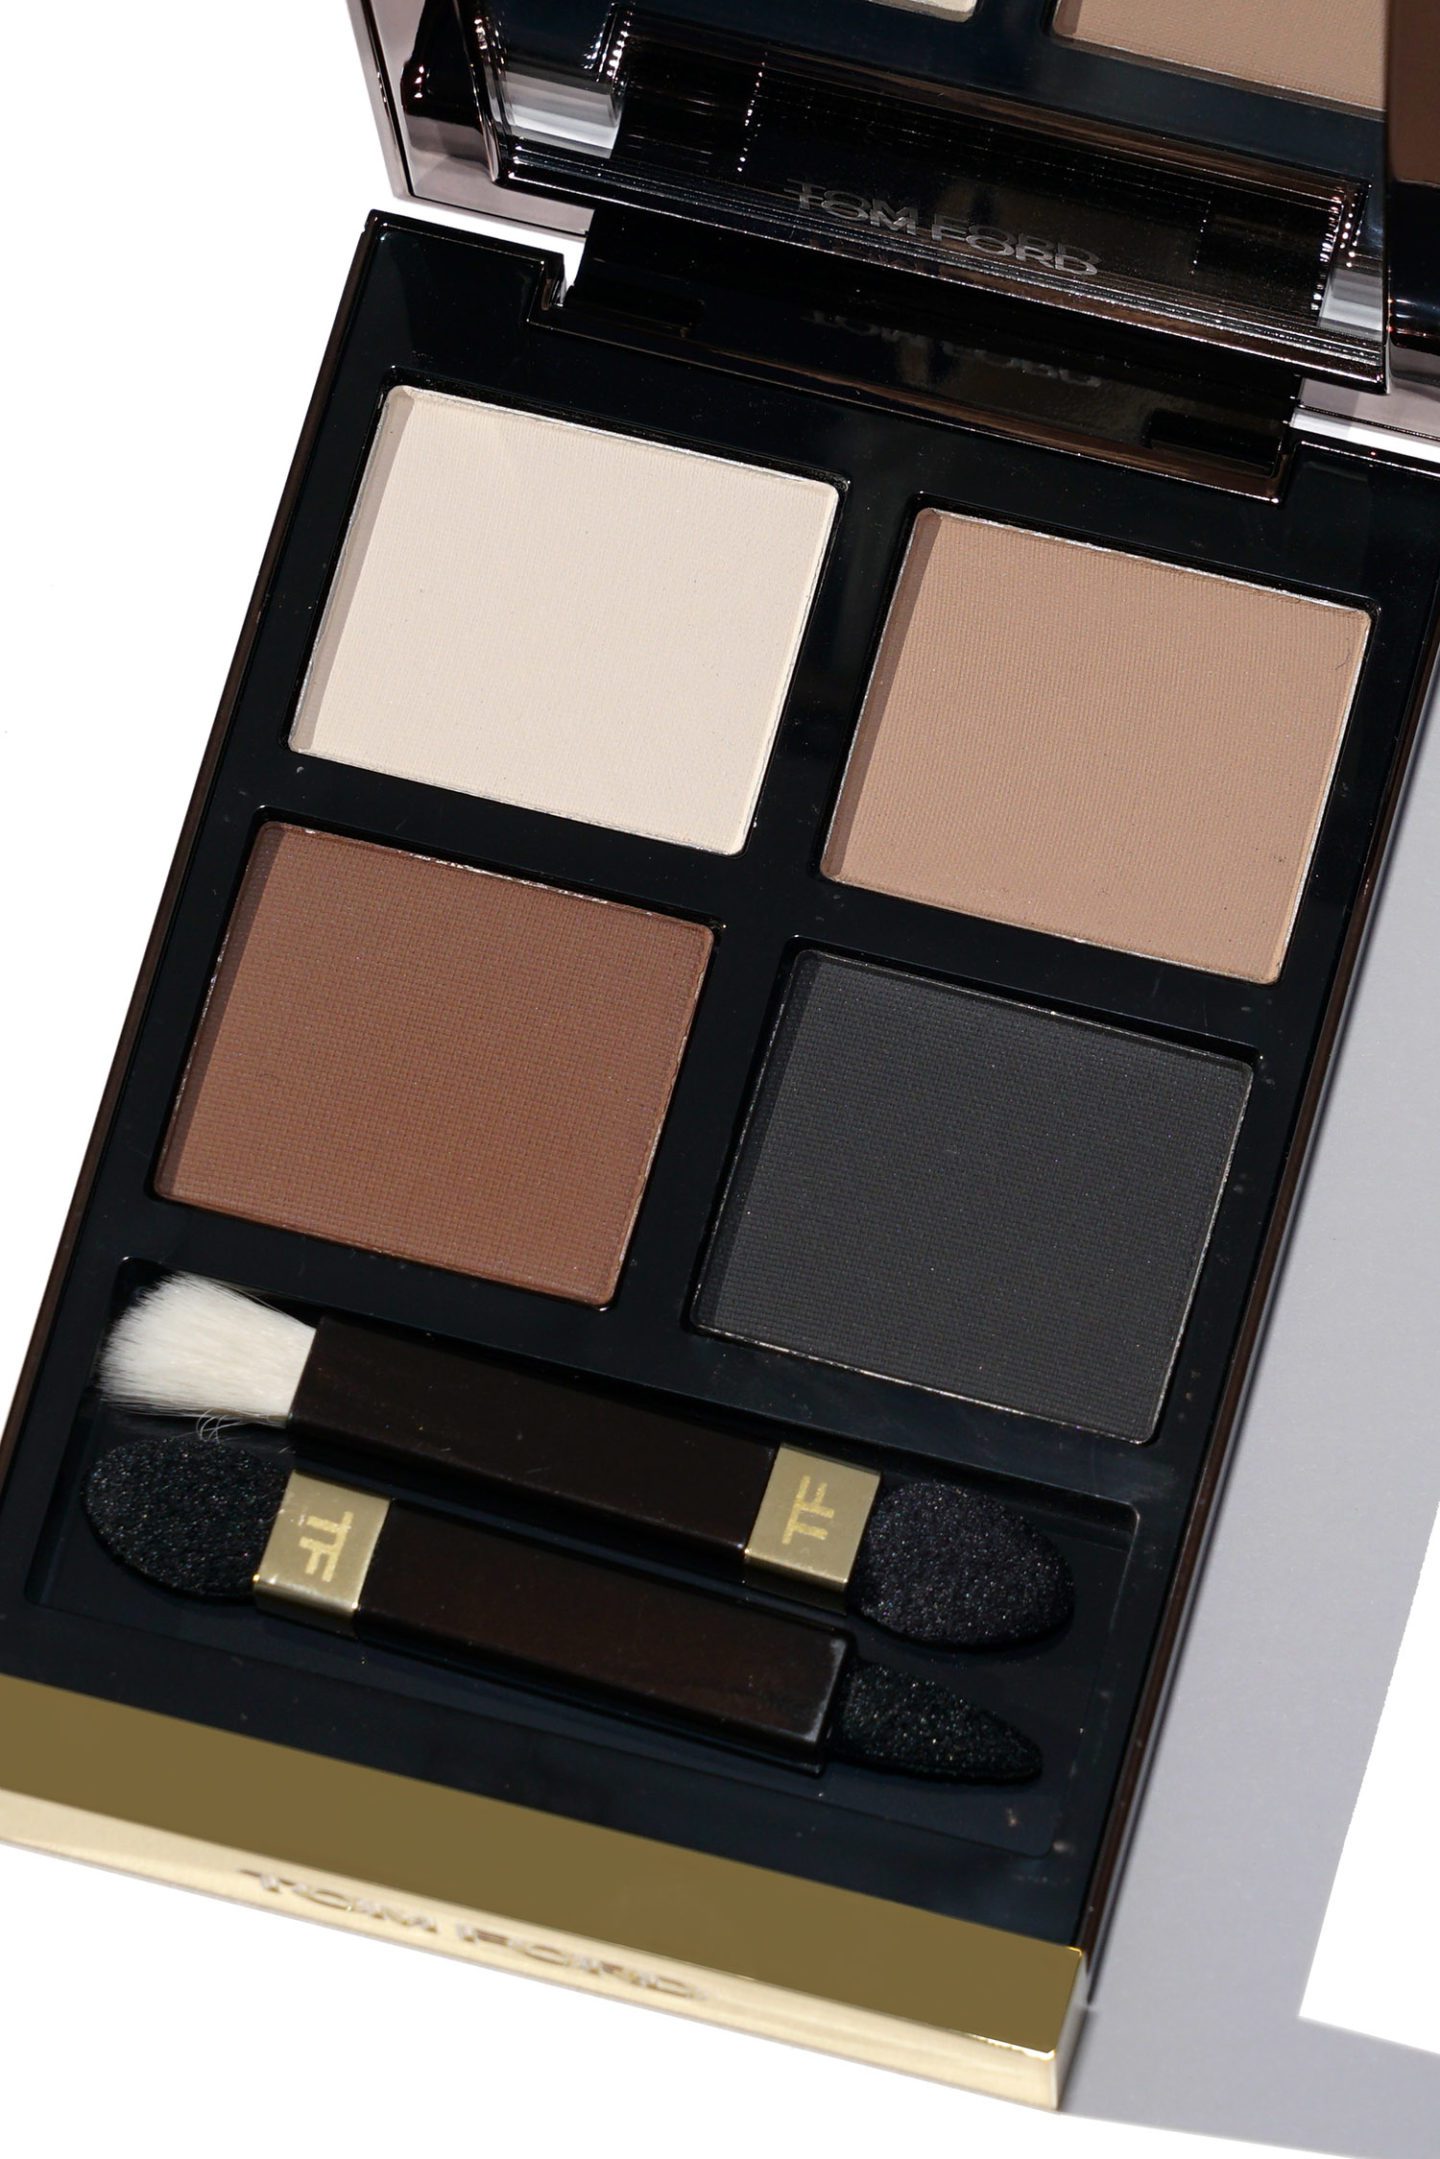 Tom Ford Eyeshadow Quad Mink Mirage review